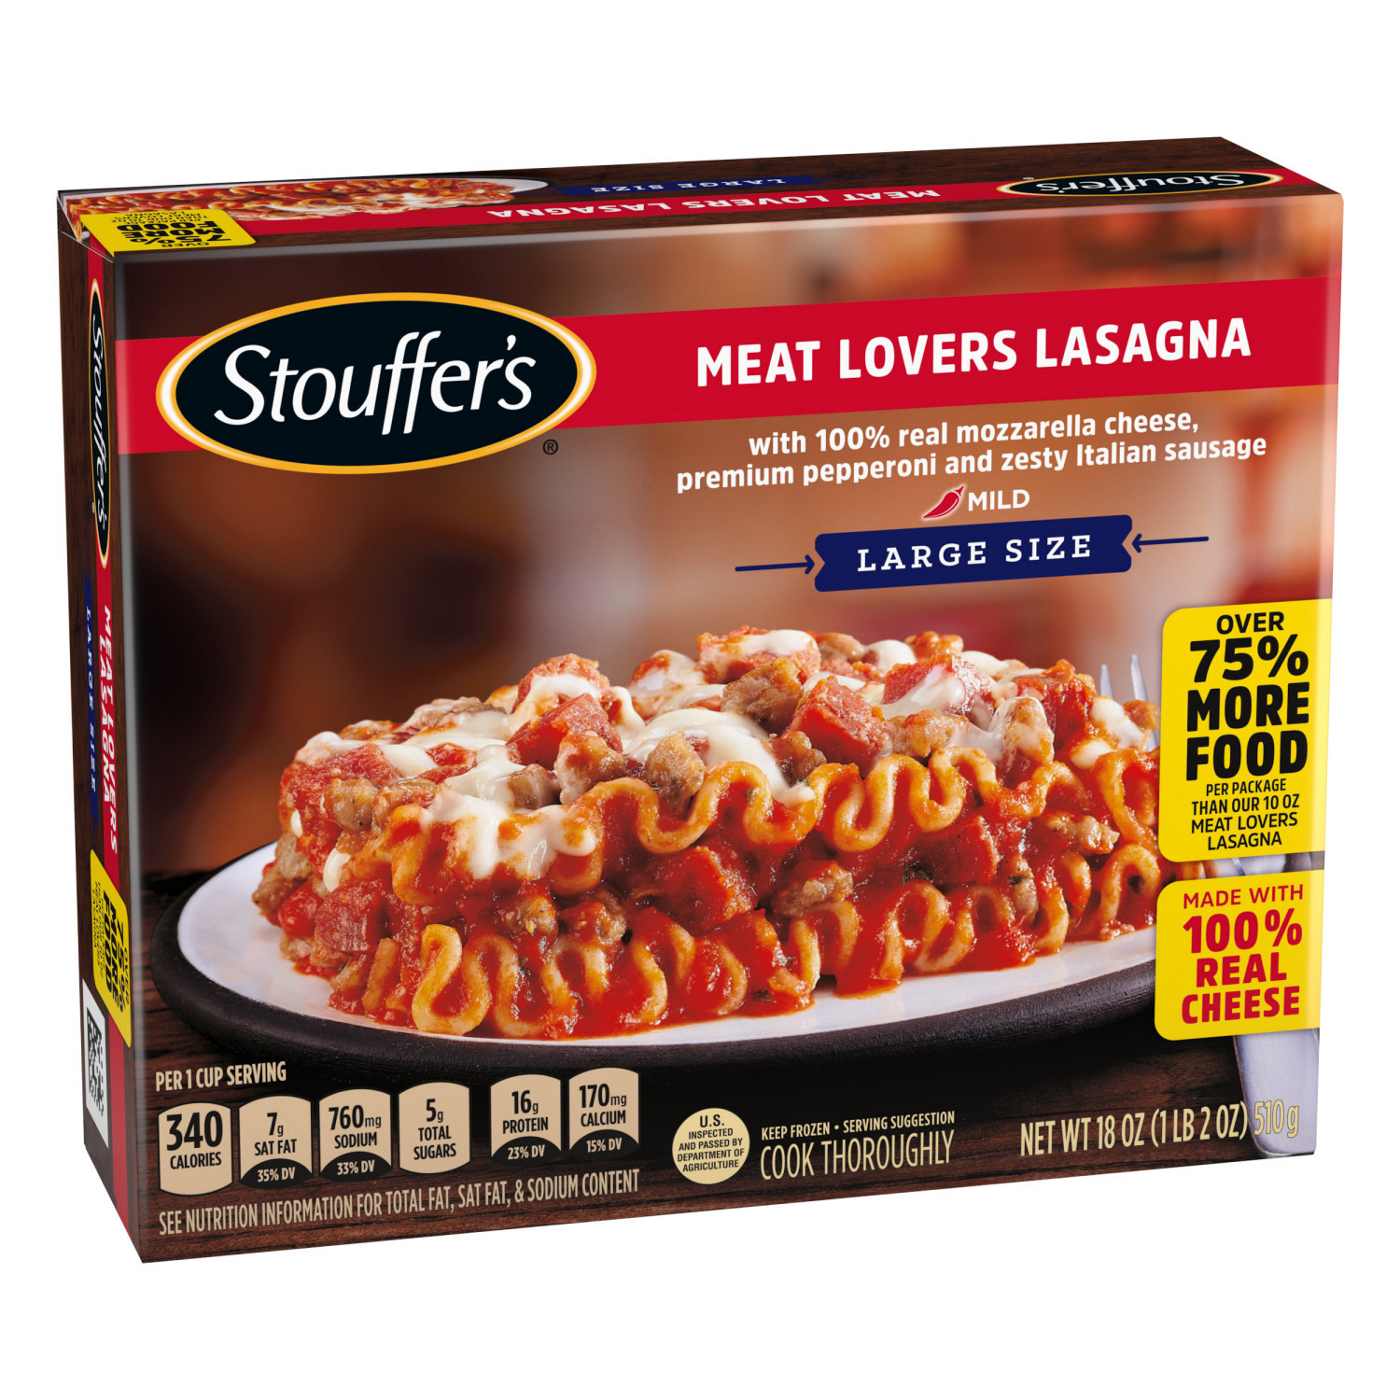 Stouffer's Frozen Meat Lovers Lasagna - Large Size; image 1 of 7